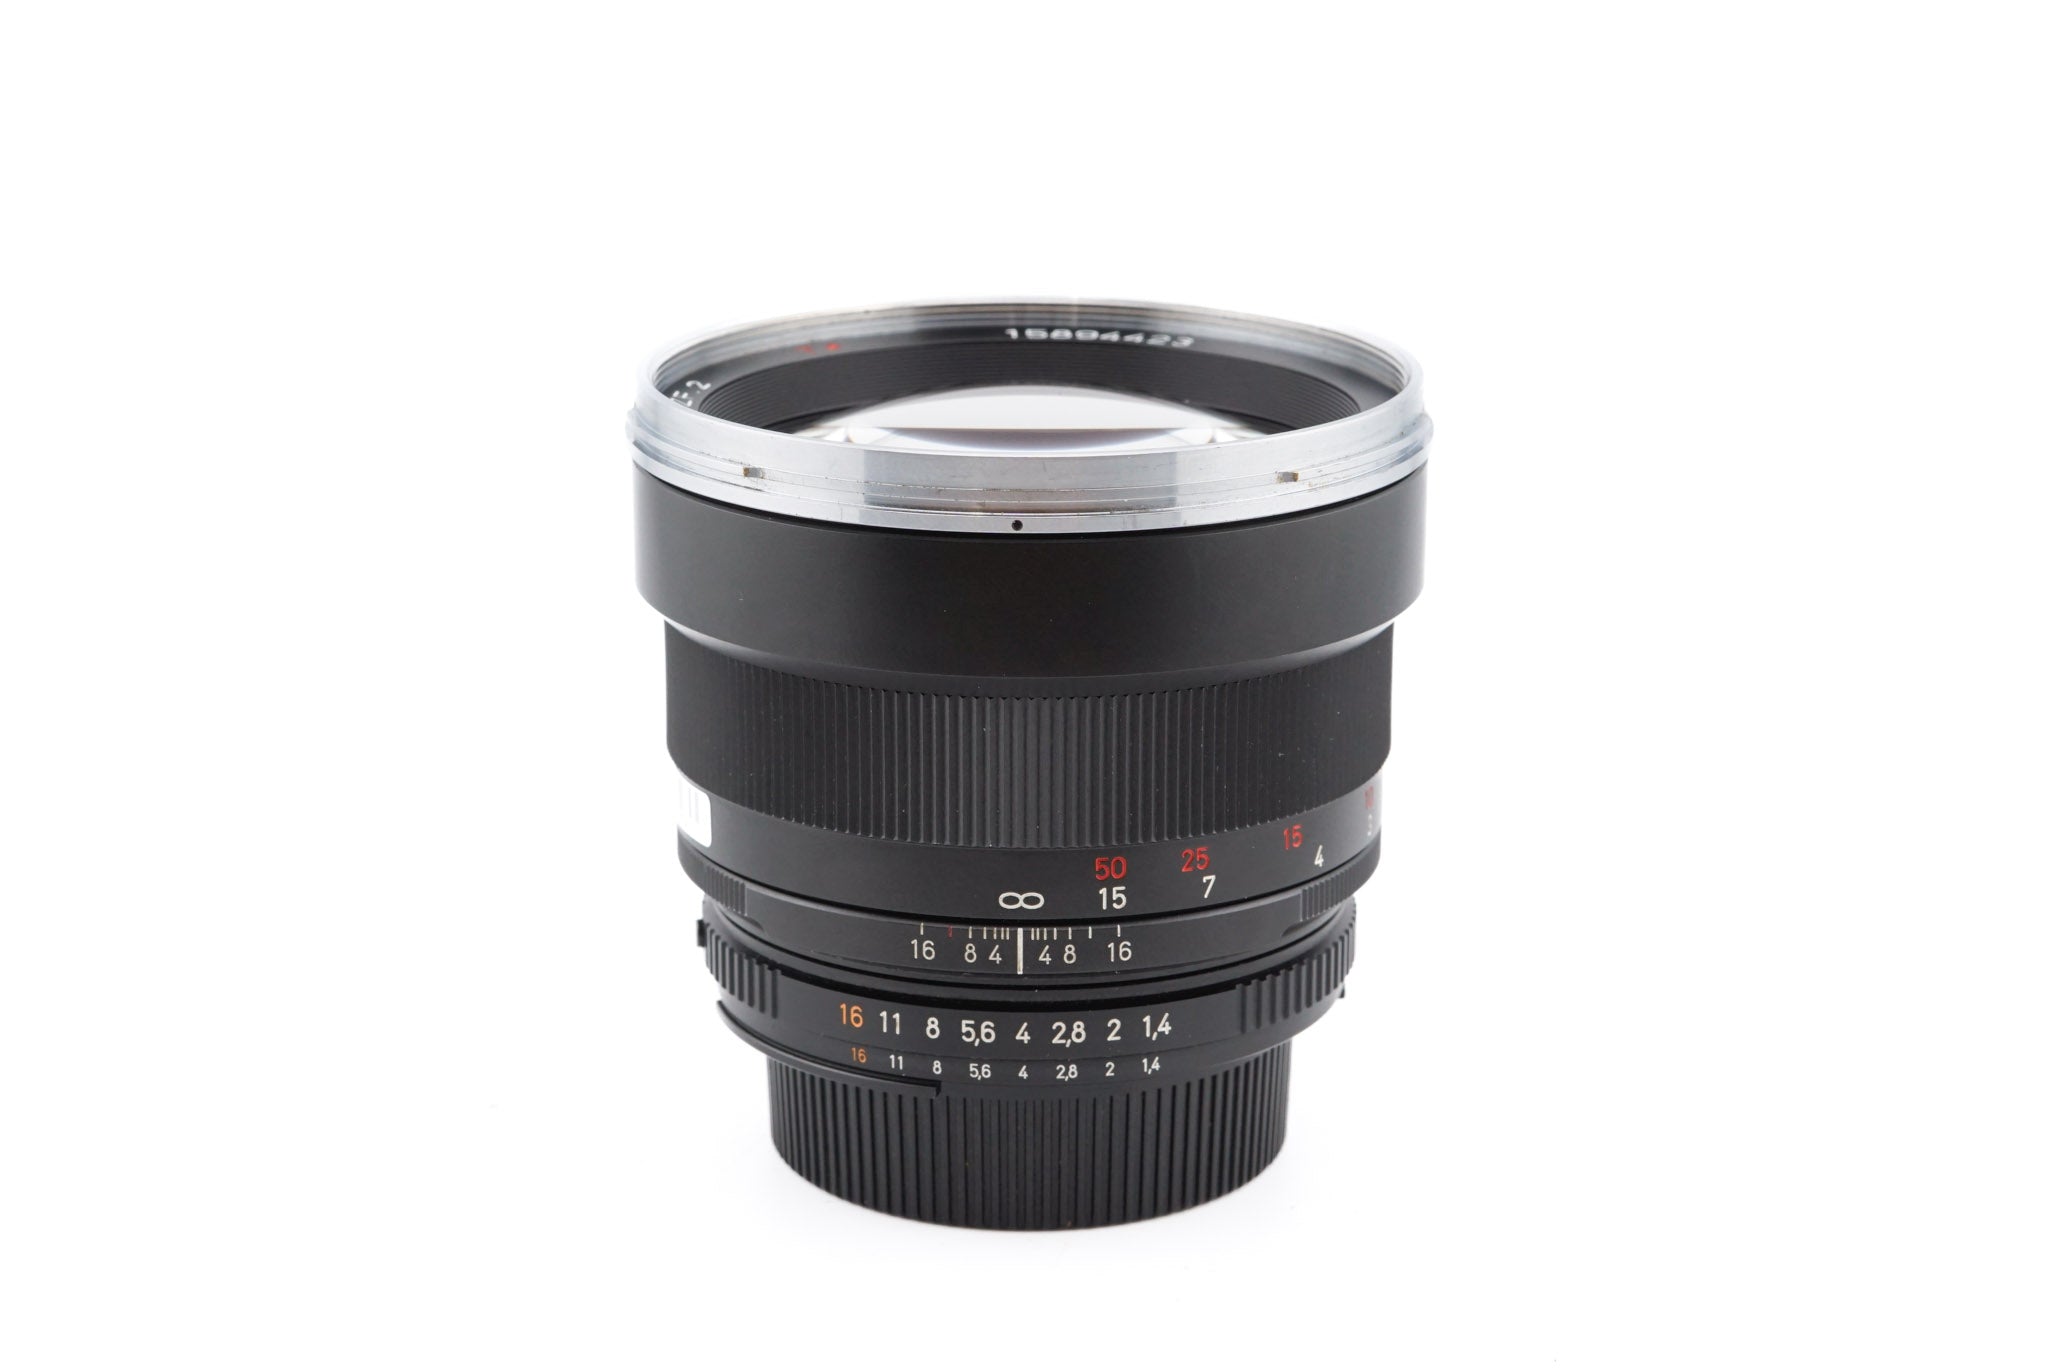 Carl Zeiss Planar T* 85mm F1.4 ZF.2 ニコンF - レンズ(単焦点)